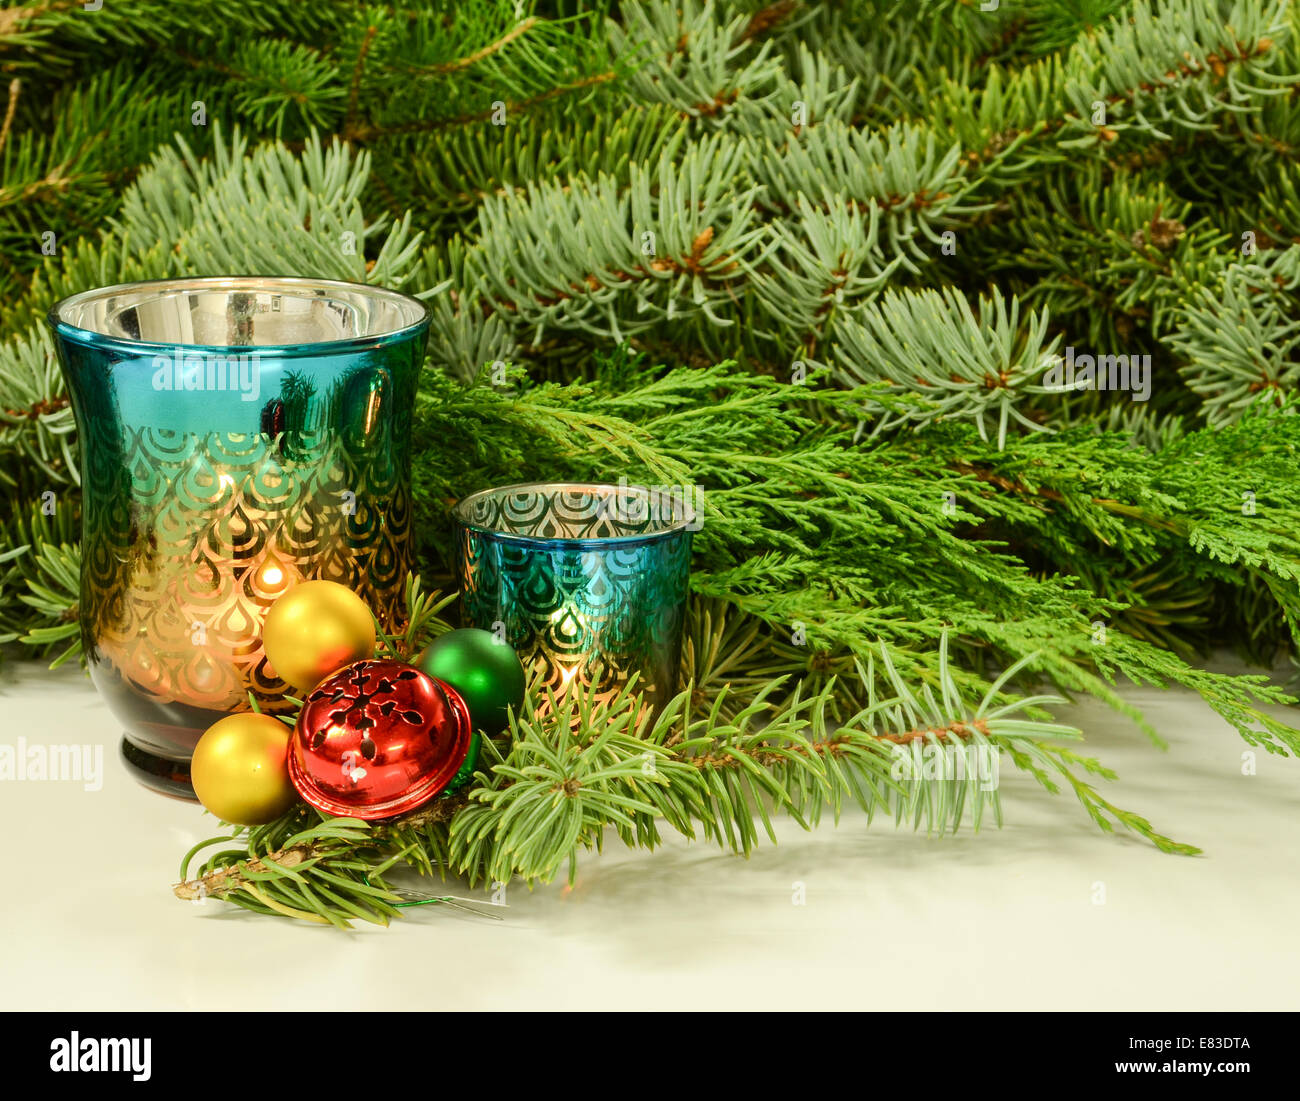 Colorful candles and Christmas ornaments in front of evergreen boughs Stock Photo